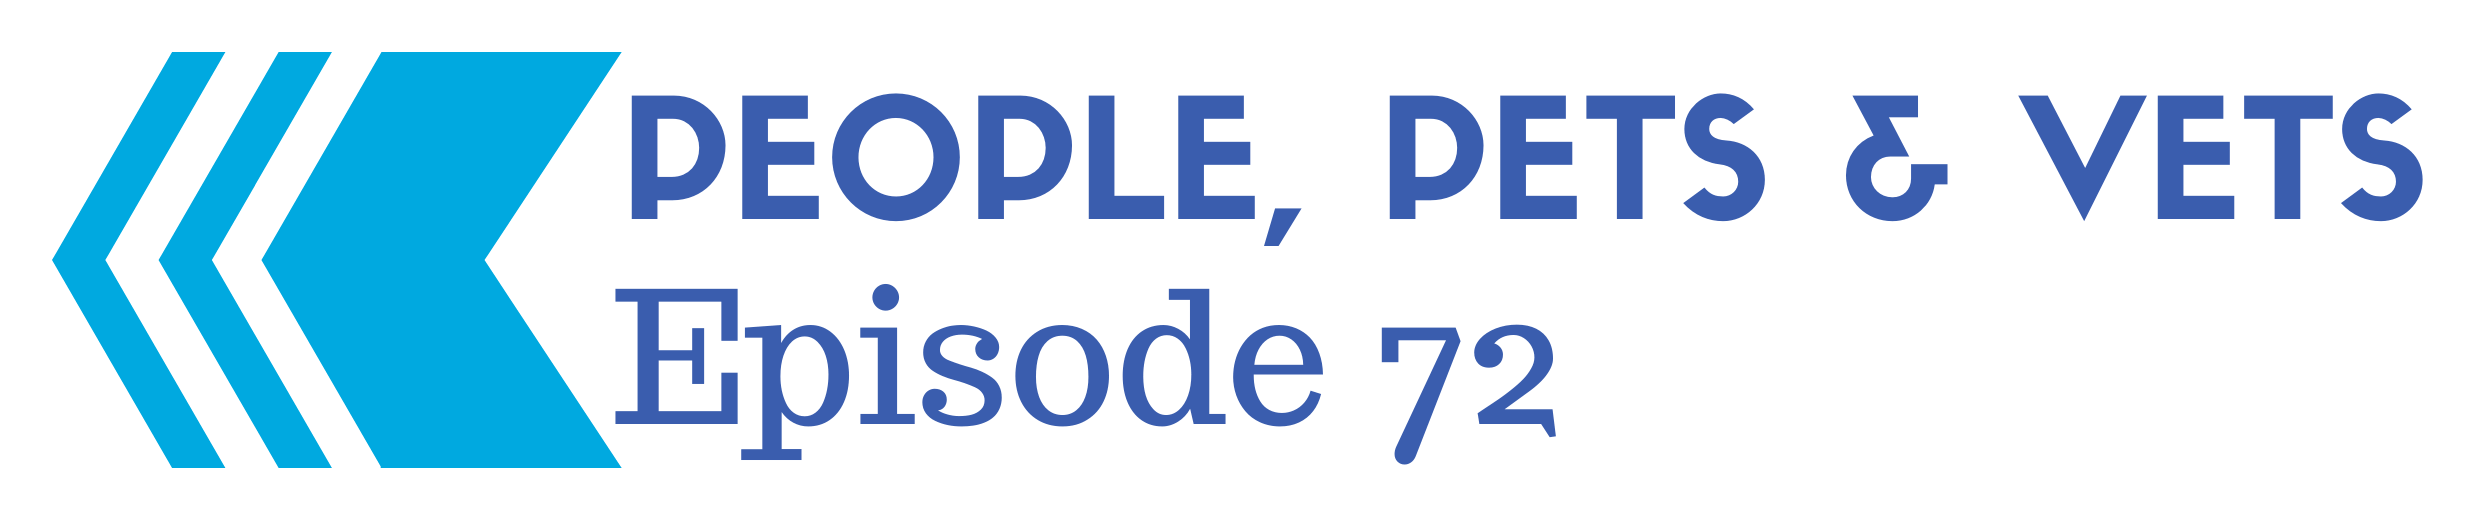 Back to Episode 72